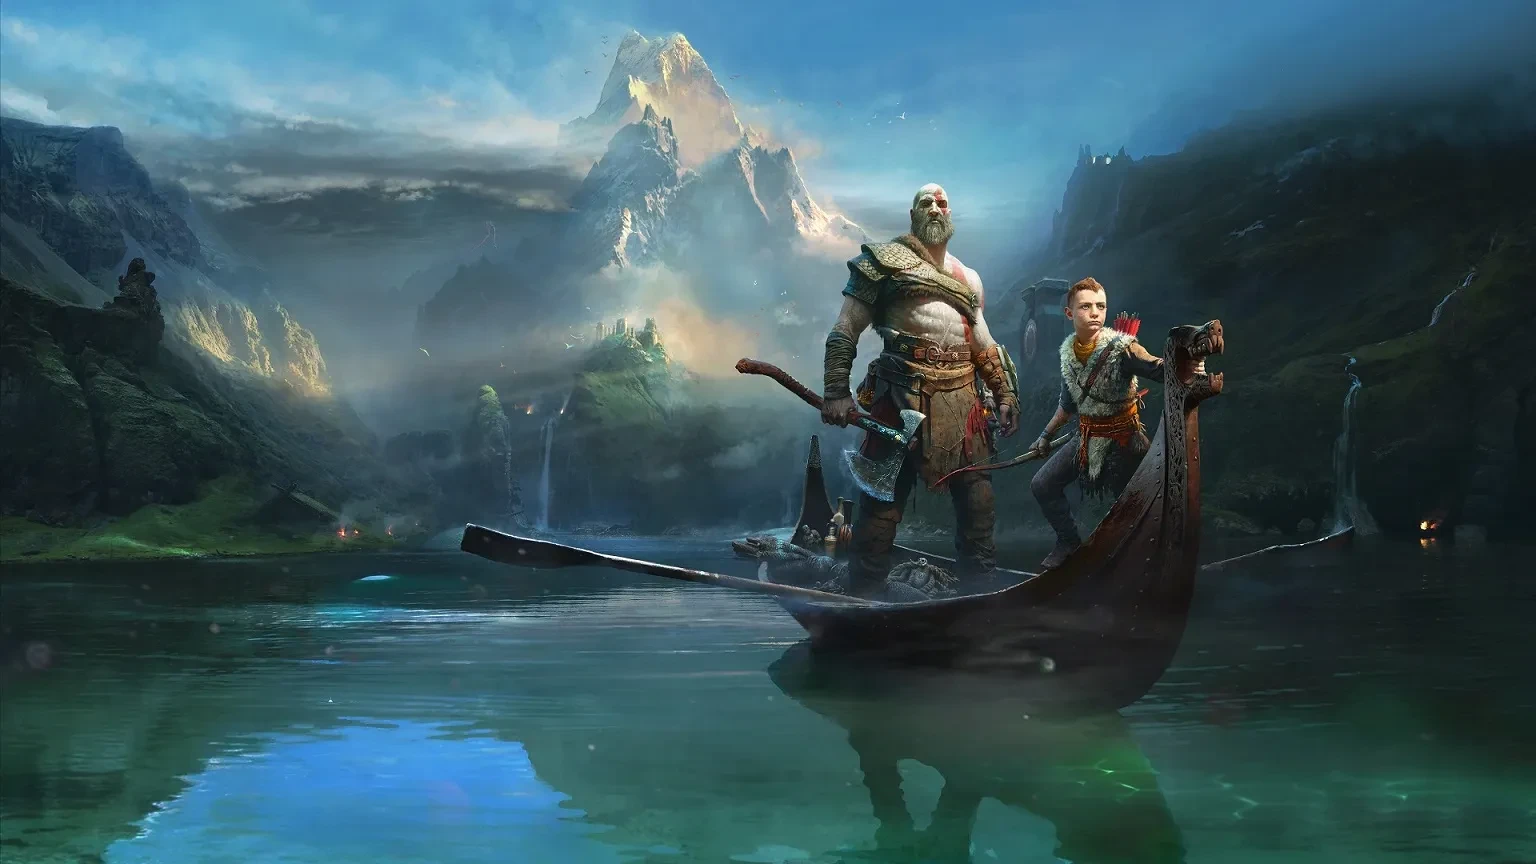 David Jaffe parted ways with God of War series